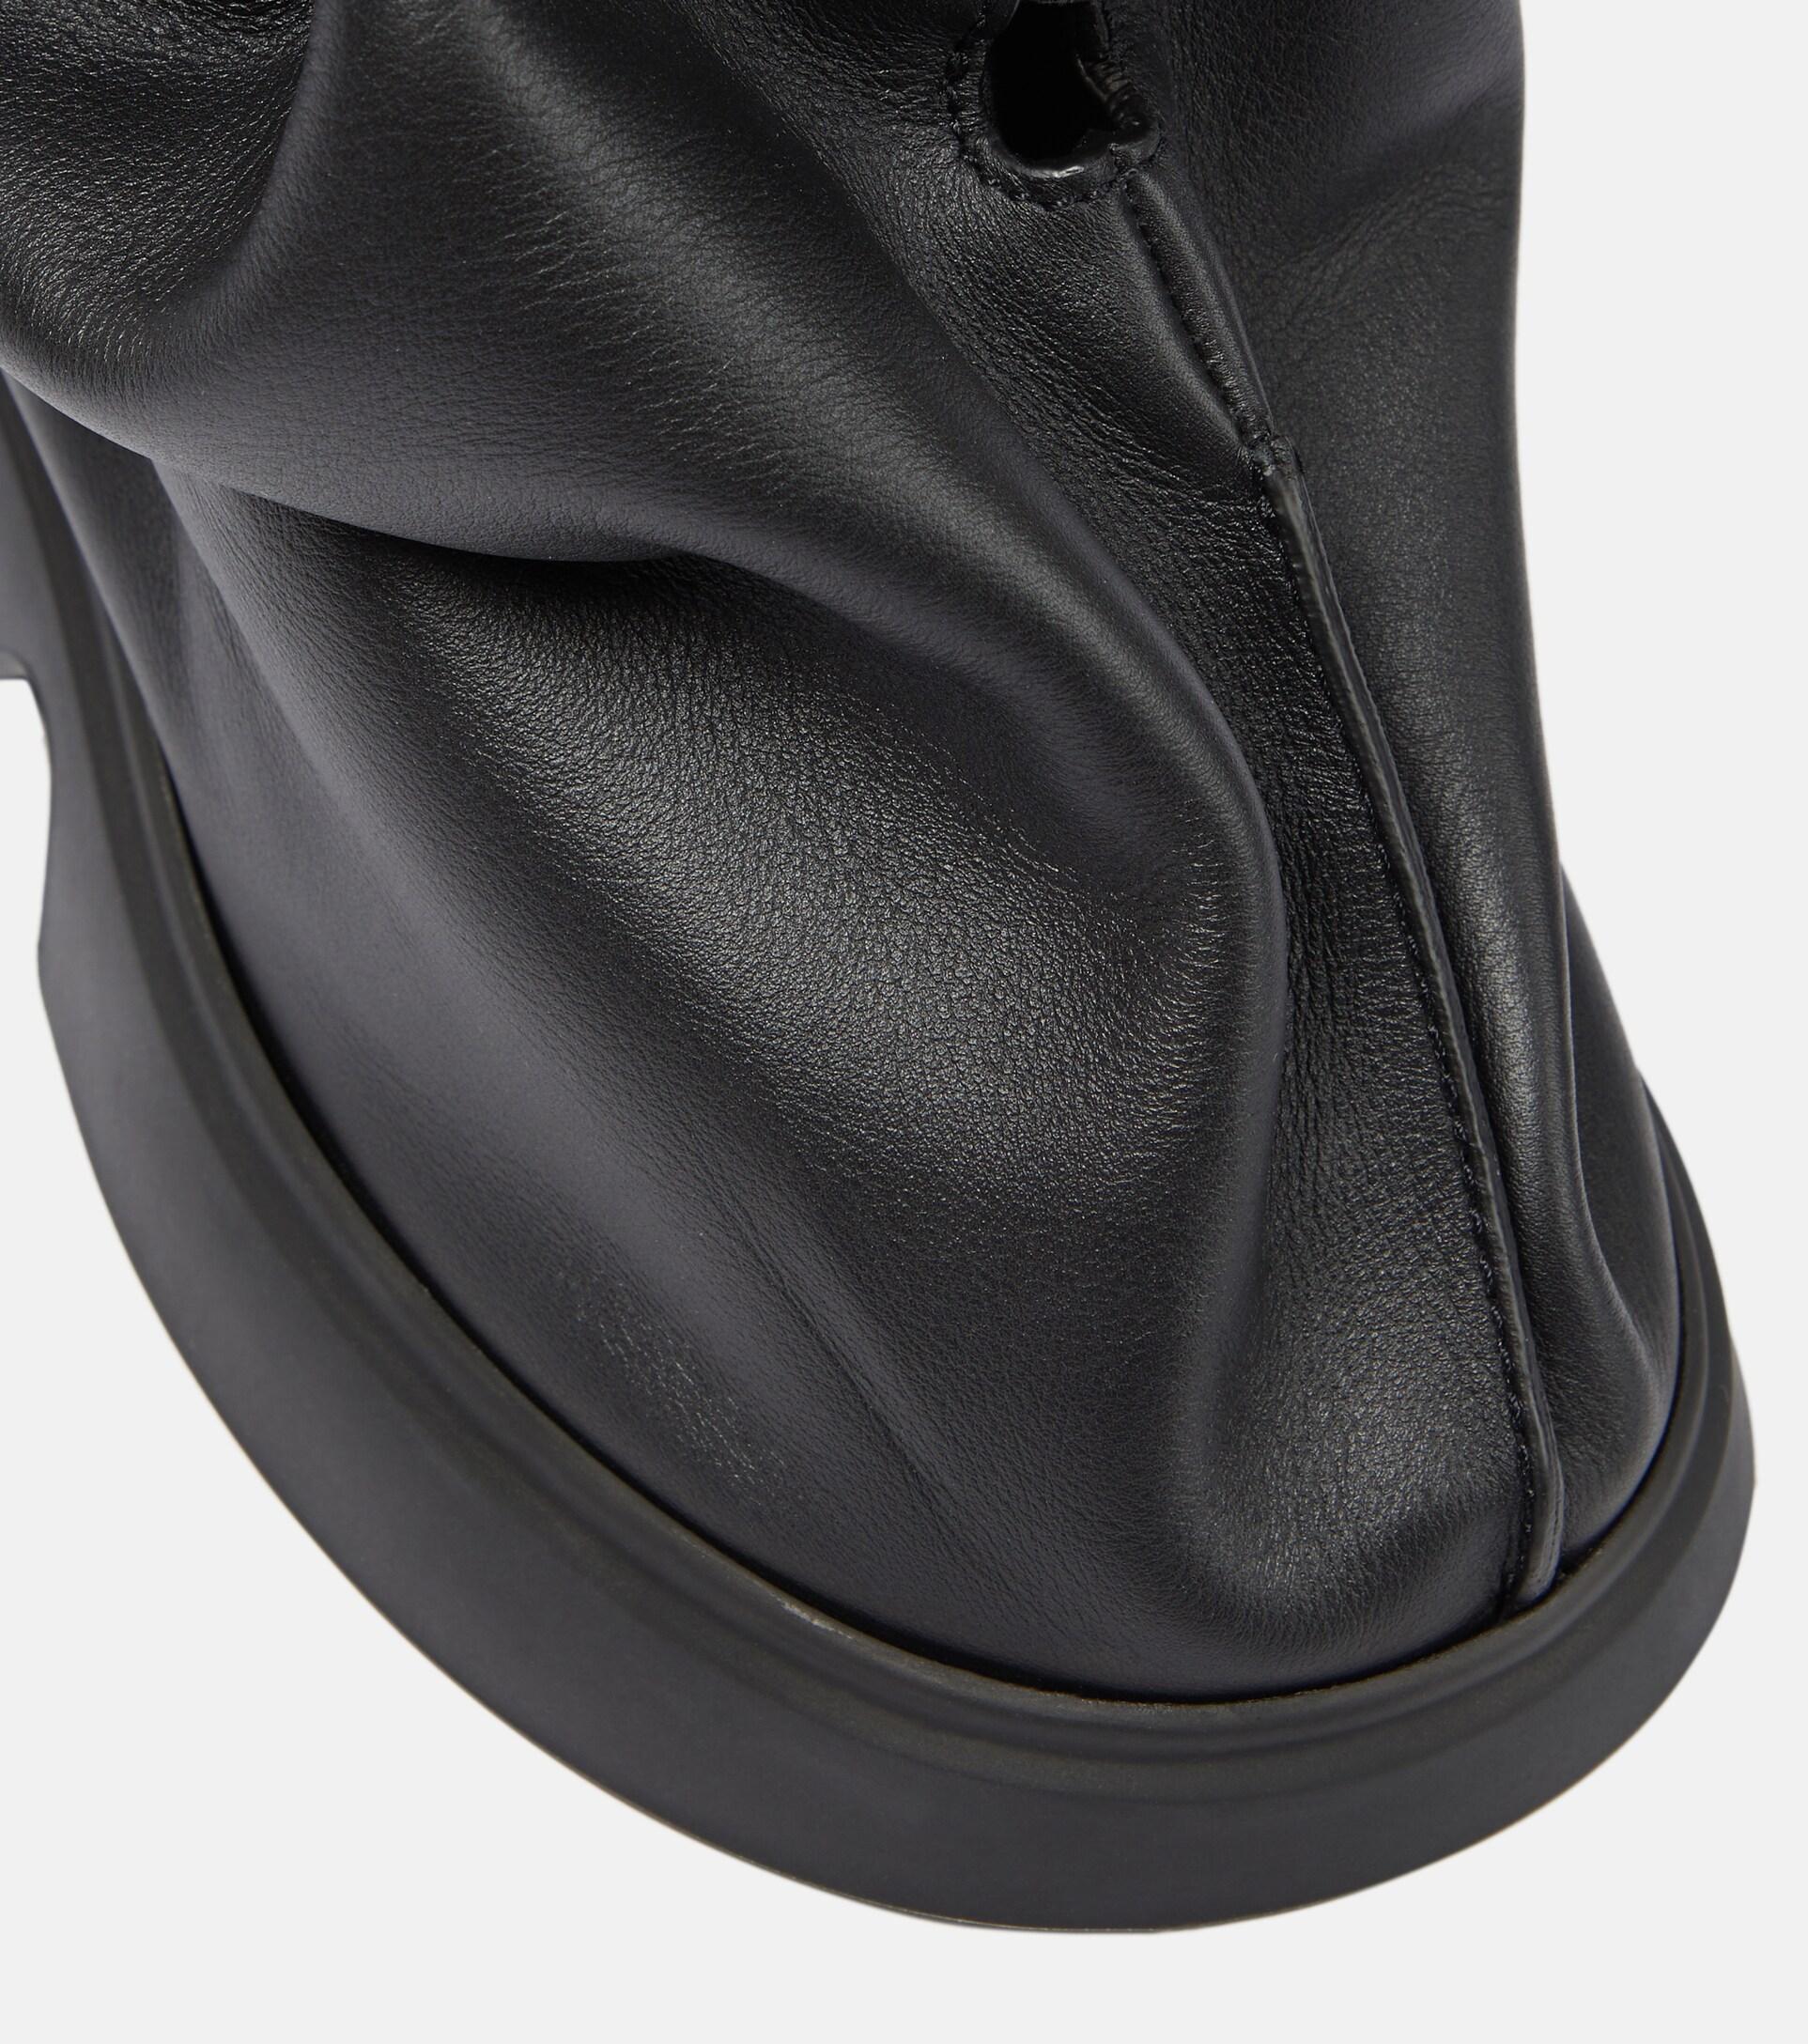 Loewe Flamenco Leather Wedge Ankle Boots in Black | Lyst